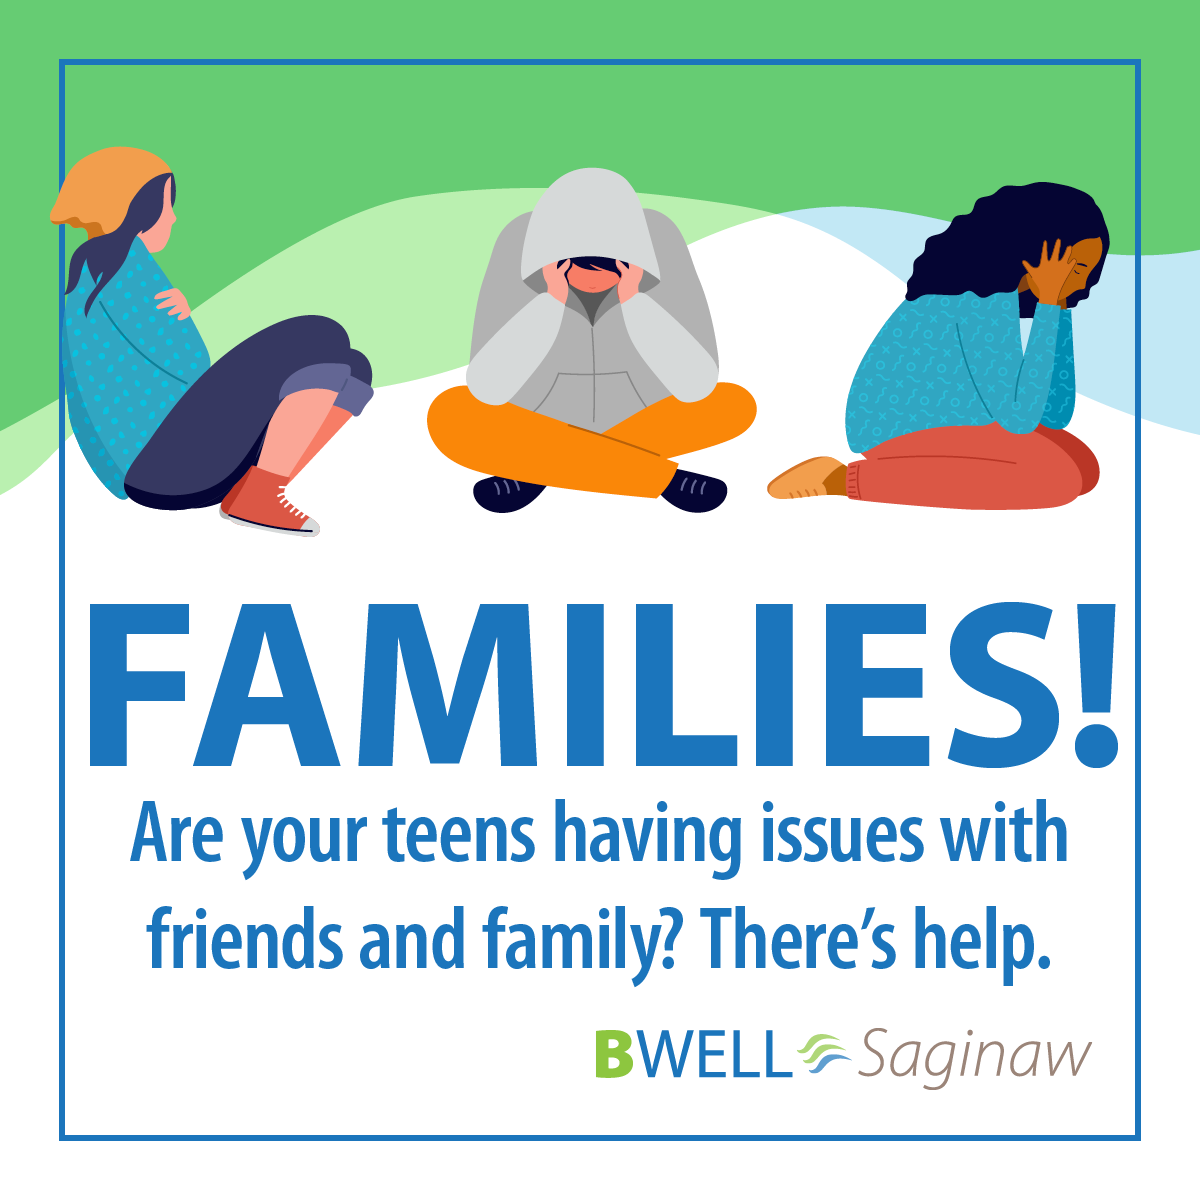 Are your teens having issues with friends and family? There’s help.